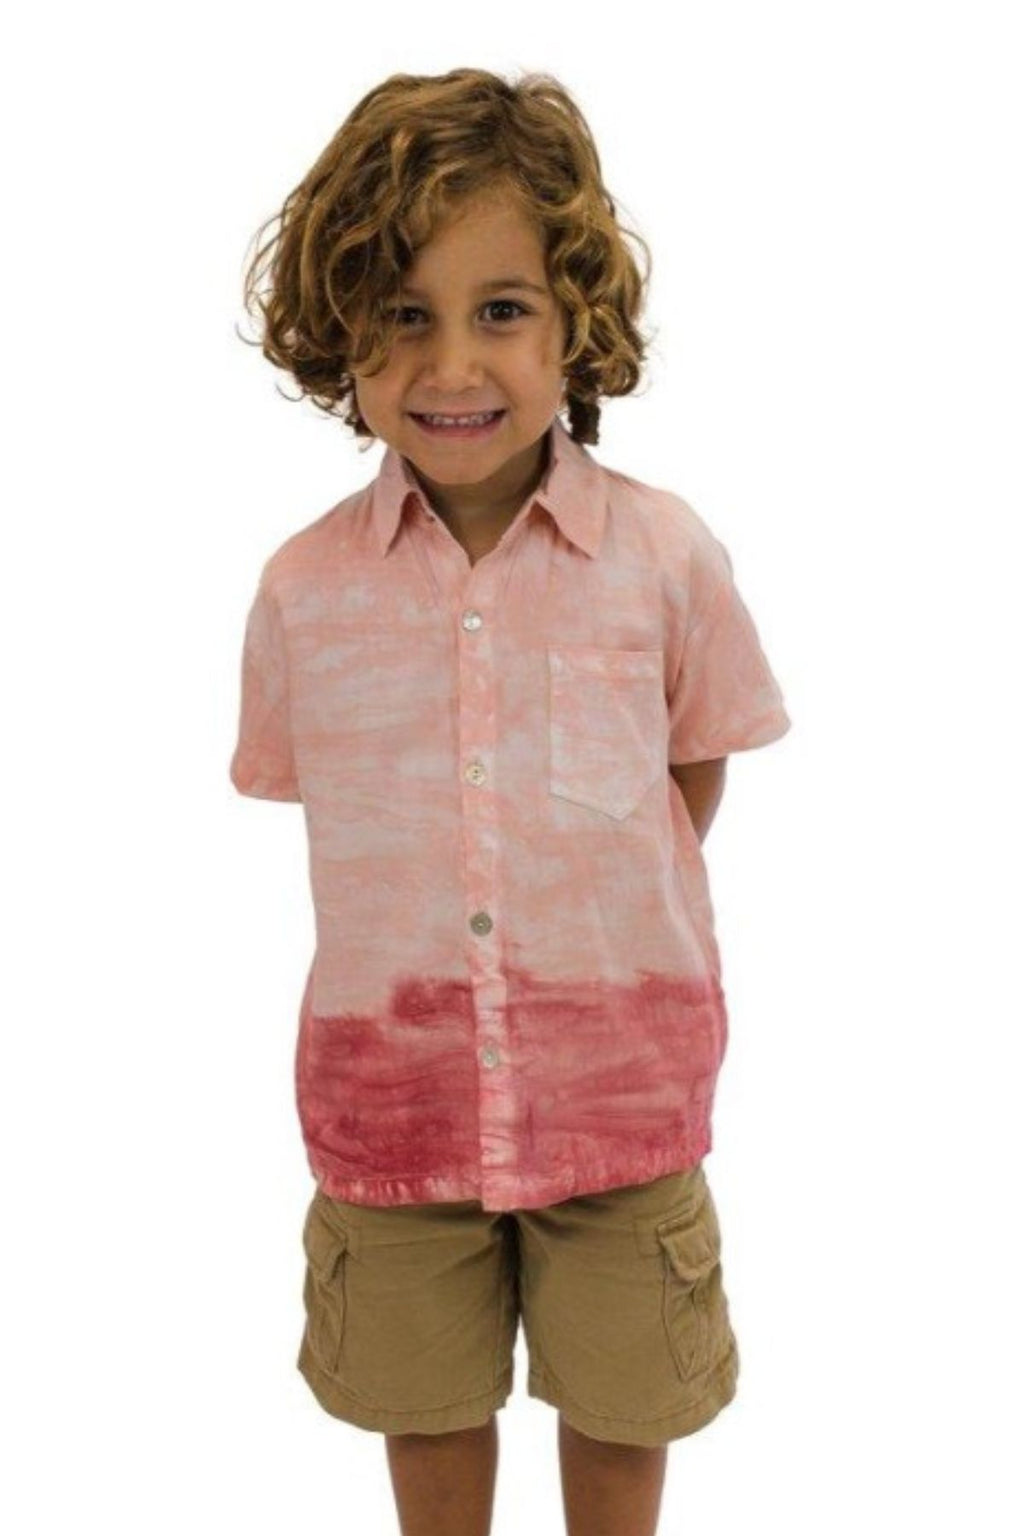 Boys tie dye shirt in red and pink